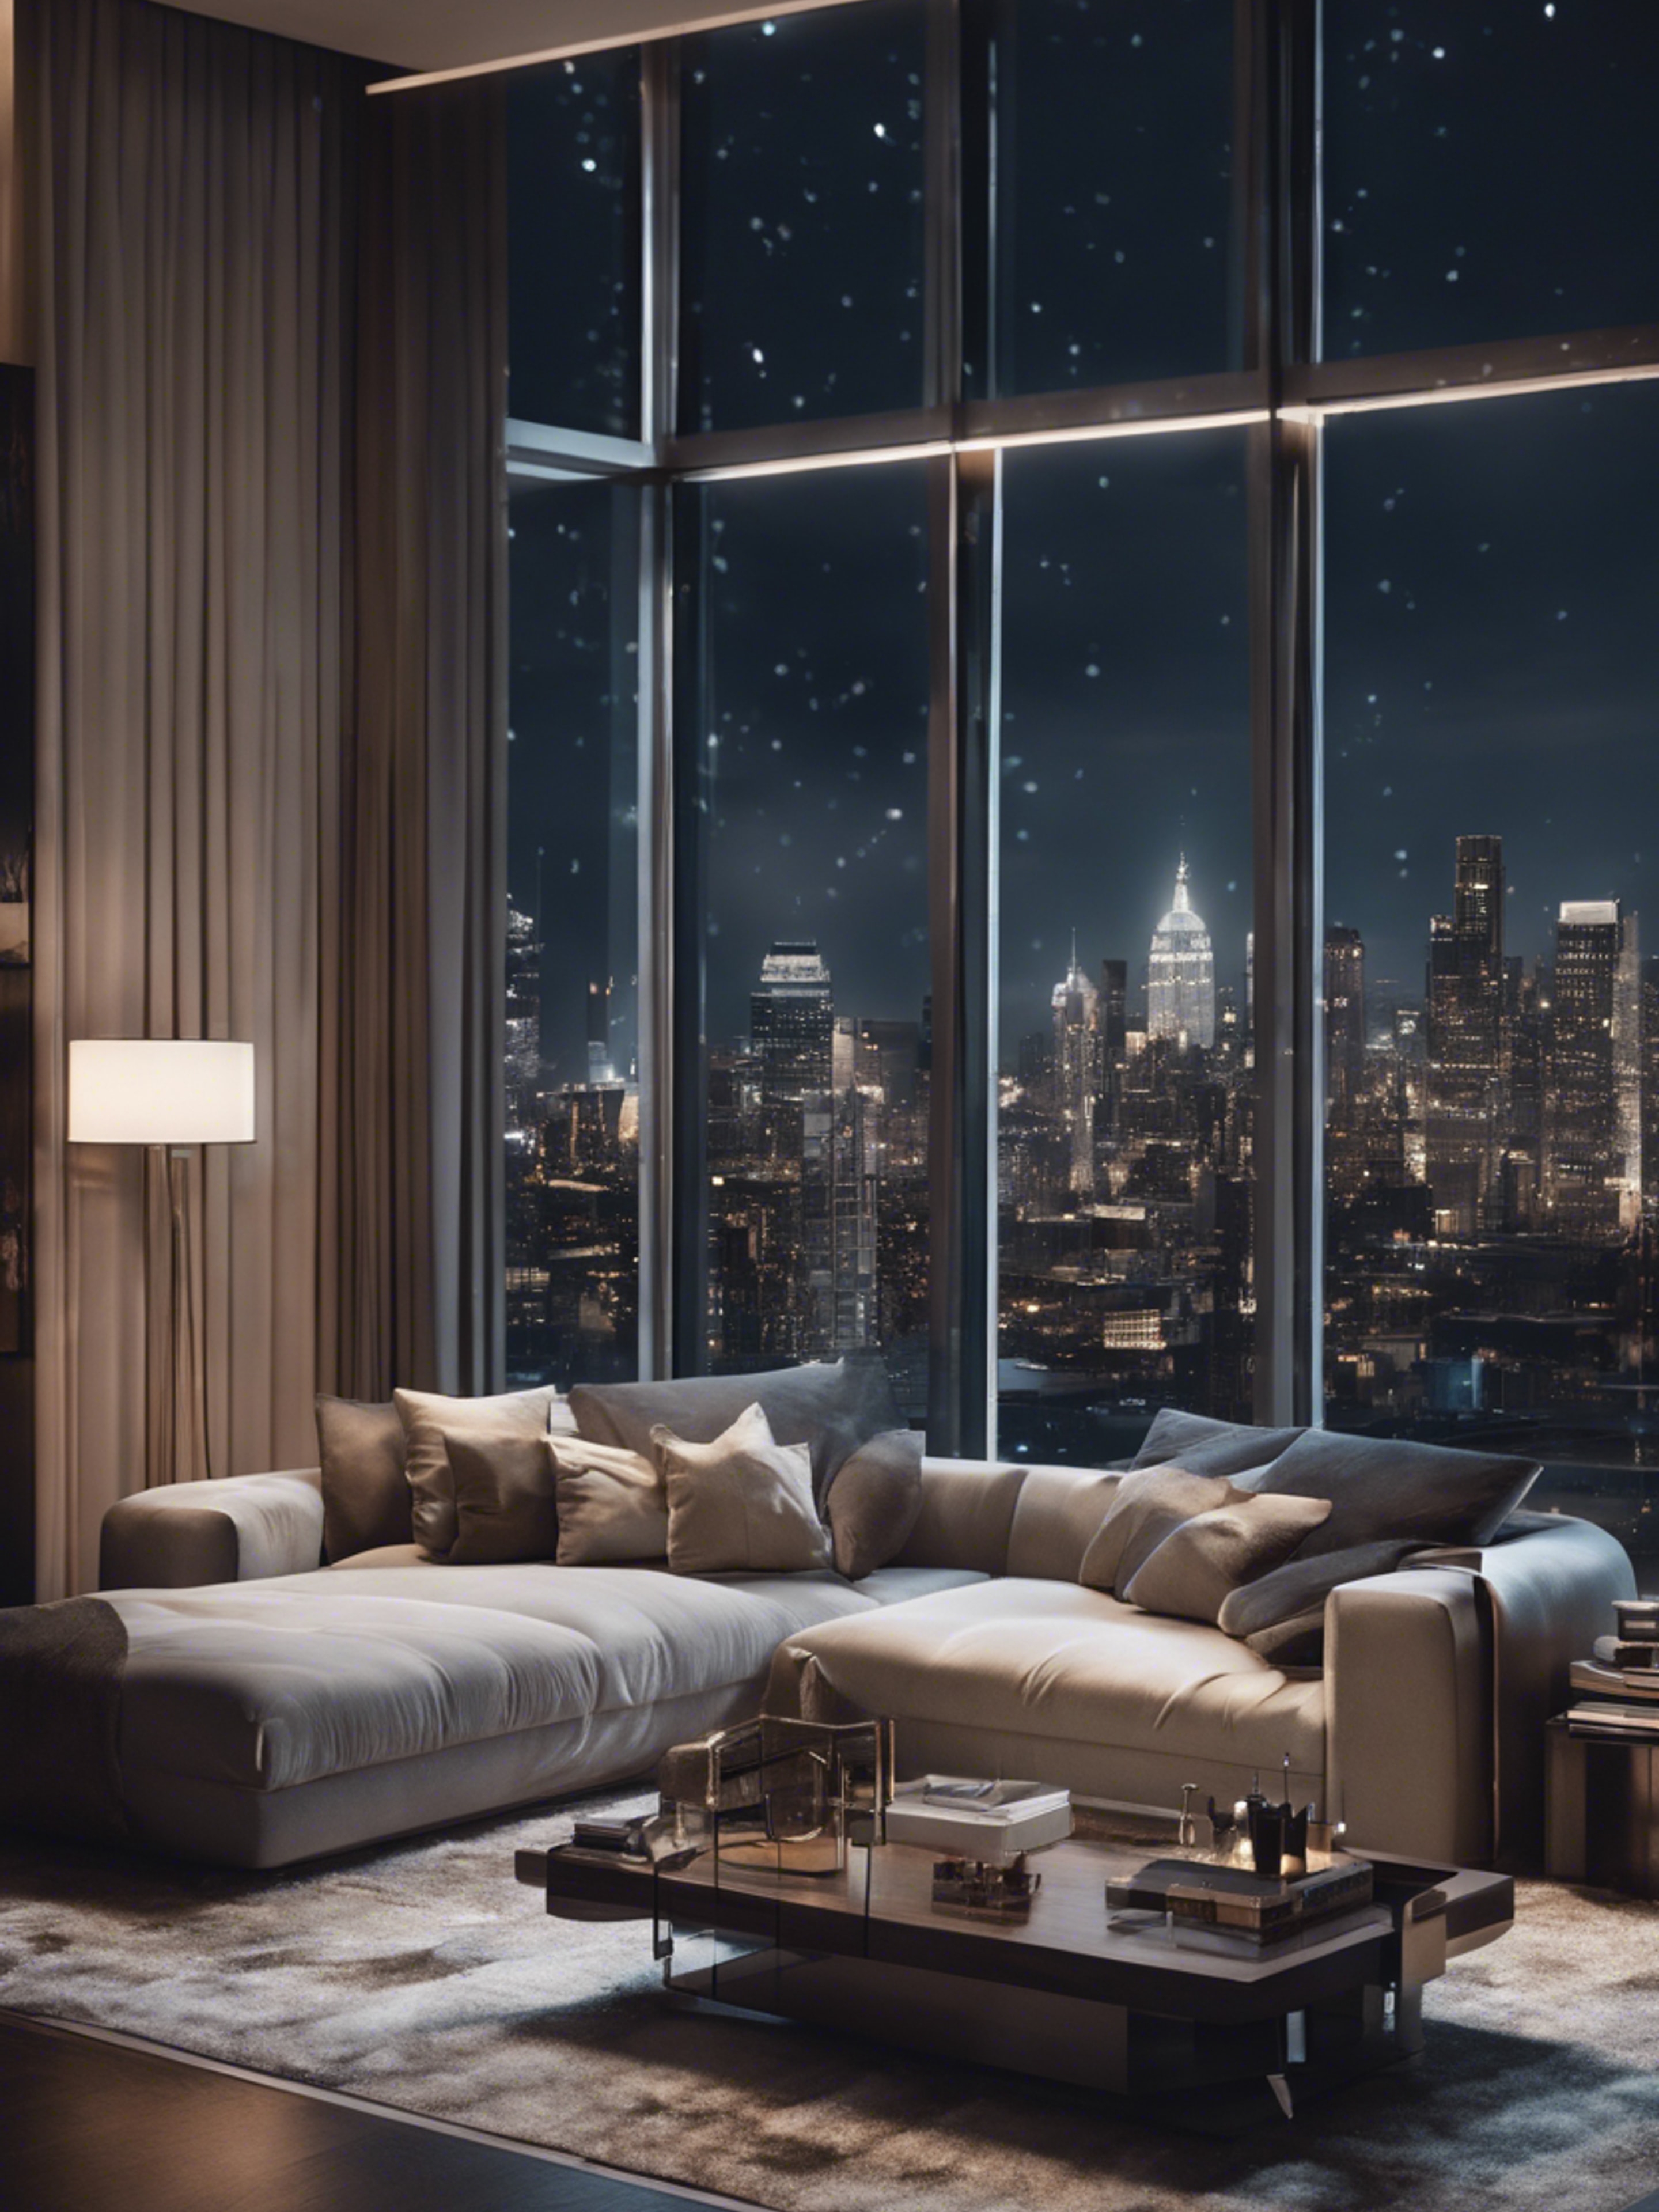 An ultra modern penthouse living room with floor-to-ceiling windows overlooking a night cityscape, adorned with stylish and minimalist decor.壁紙[32f92be3d45a43a5bc6a]